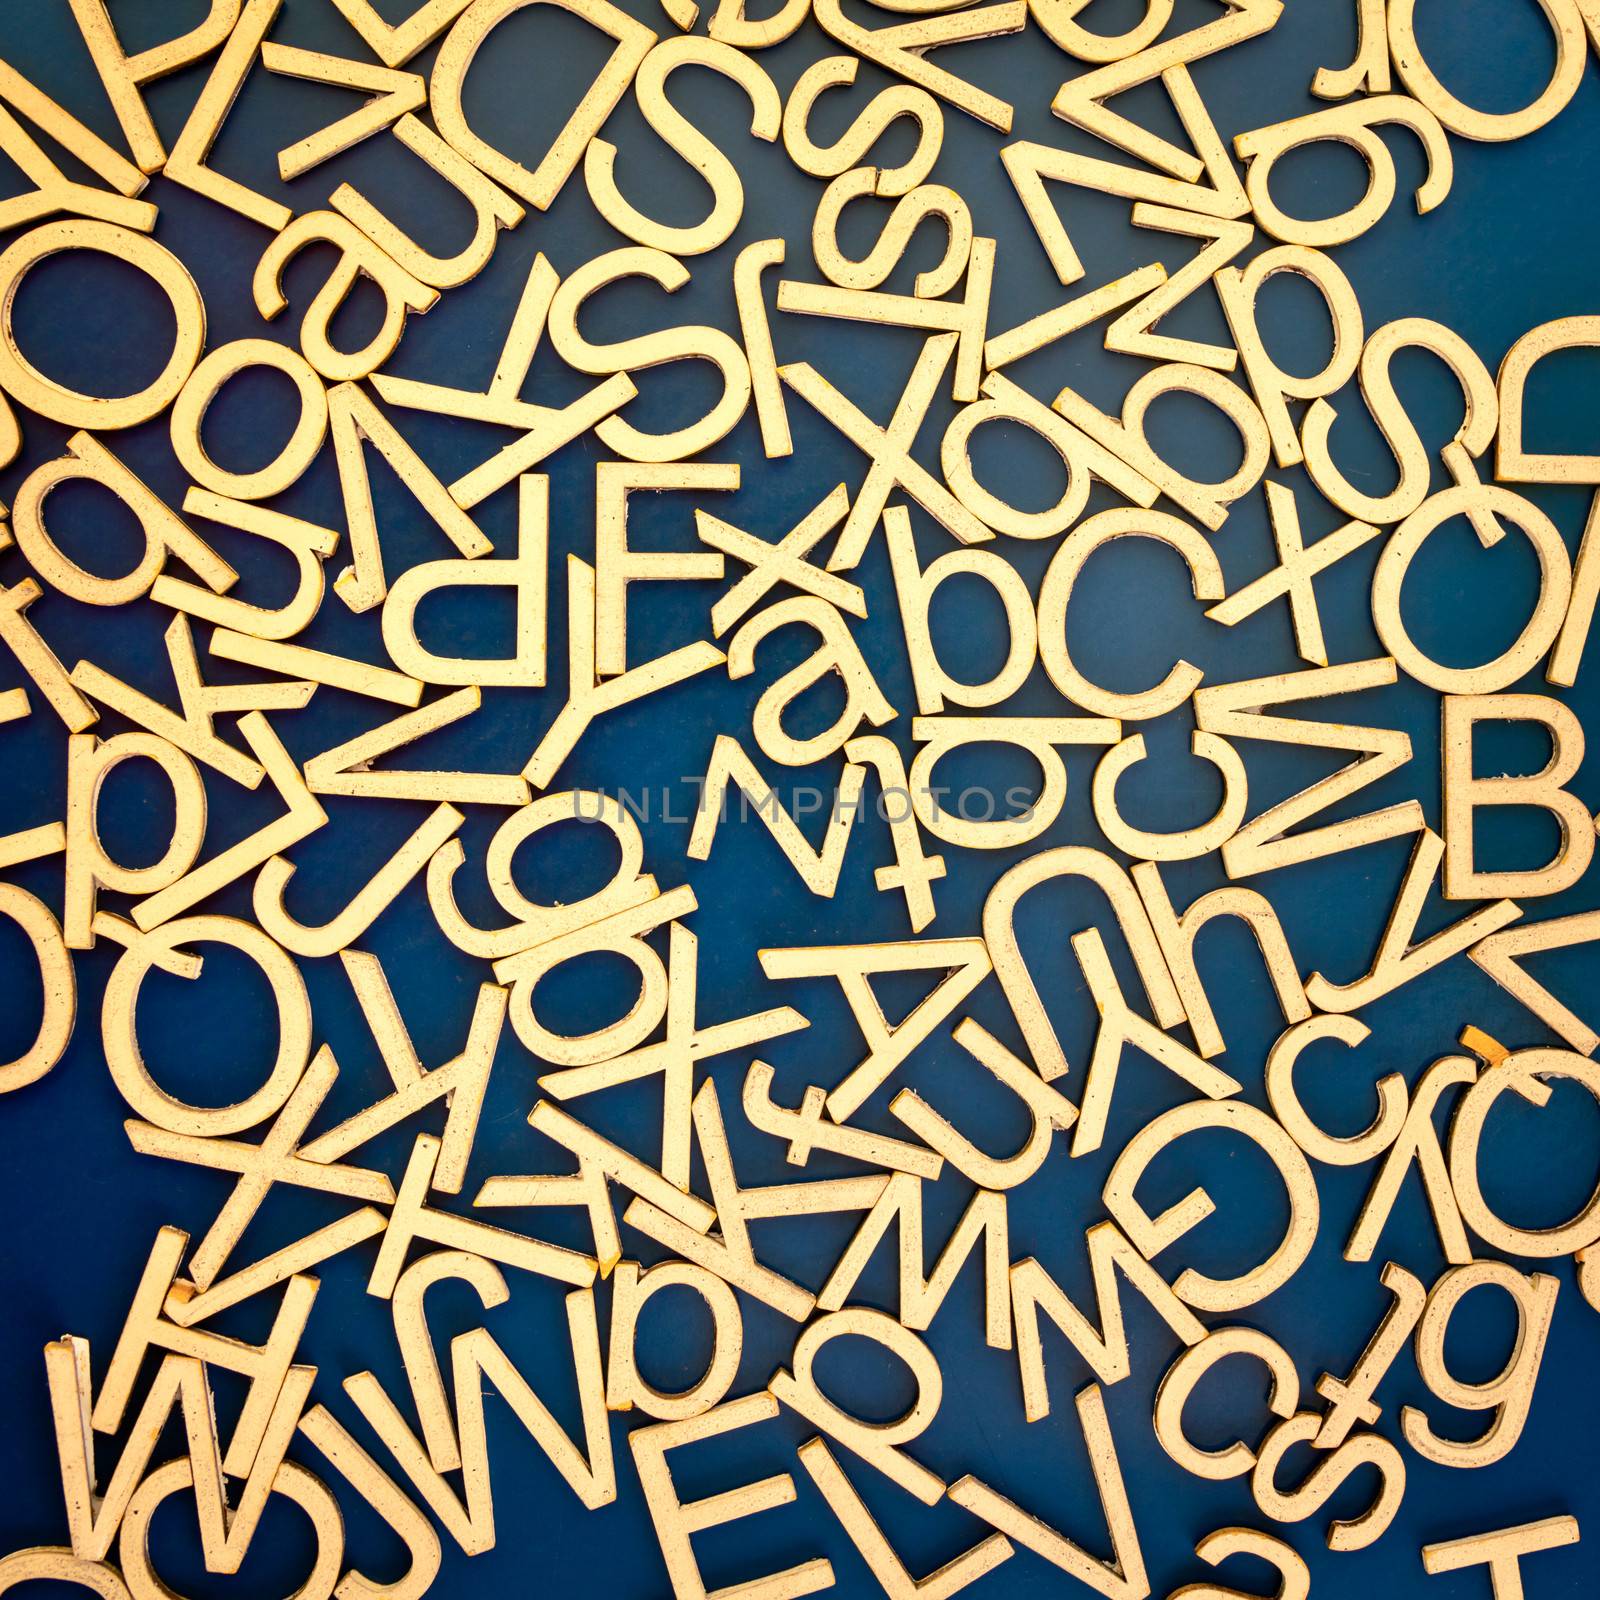 Alphabet letters on a magnetic board